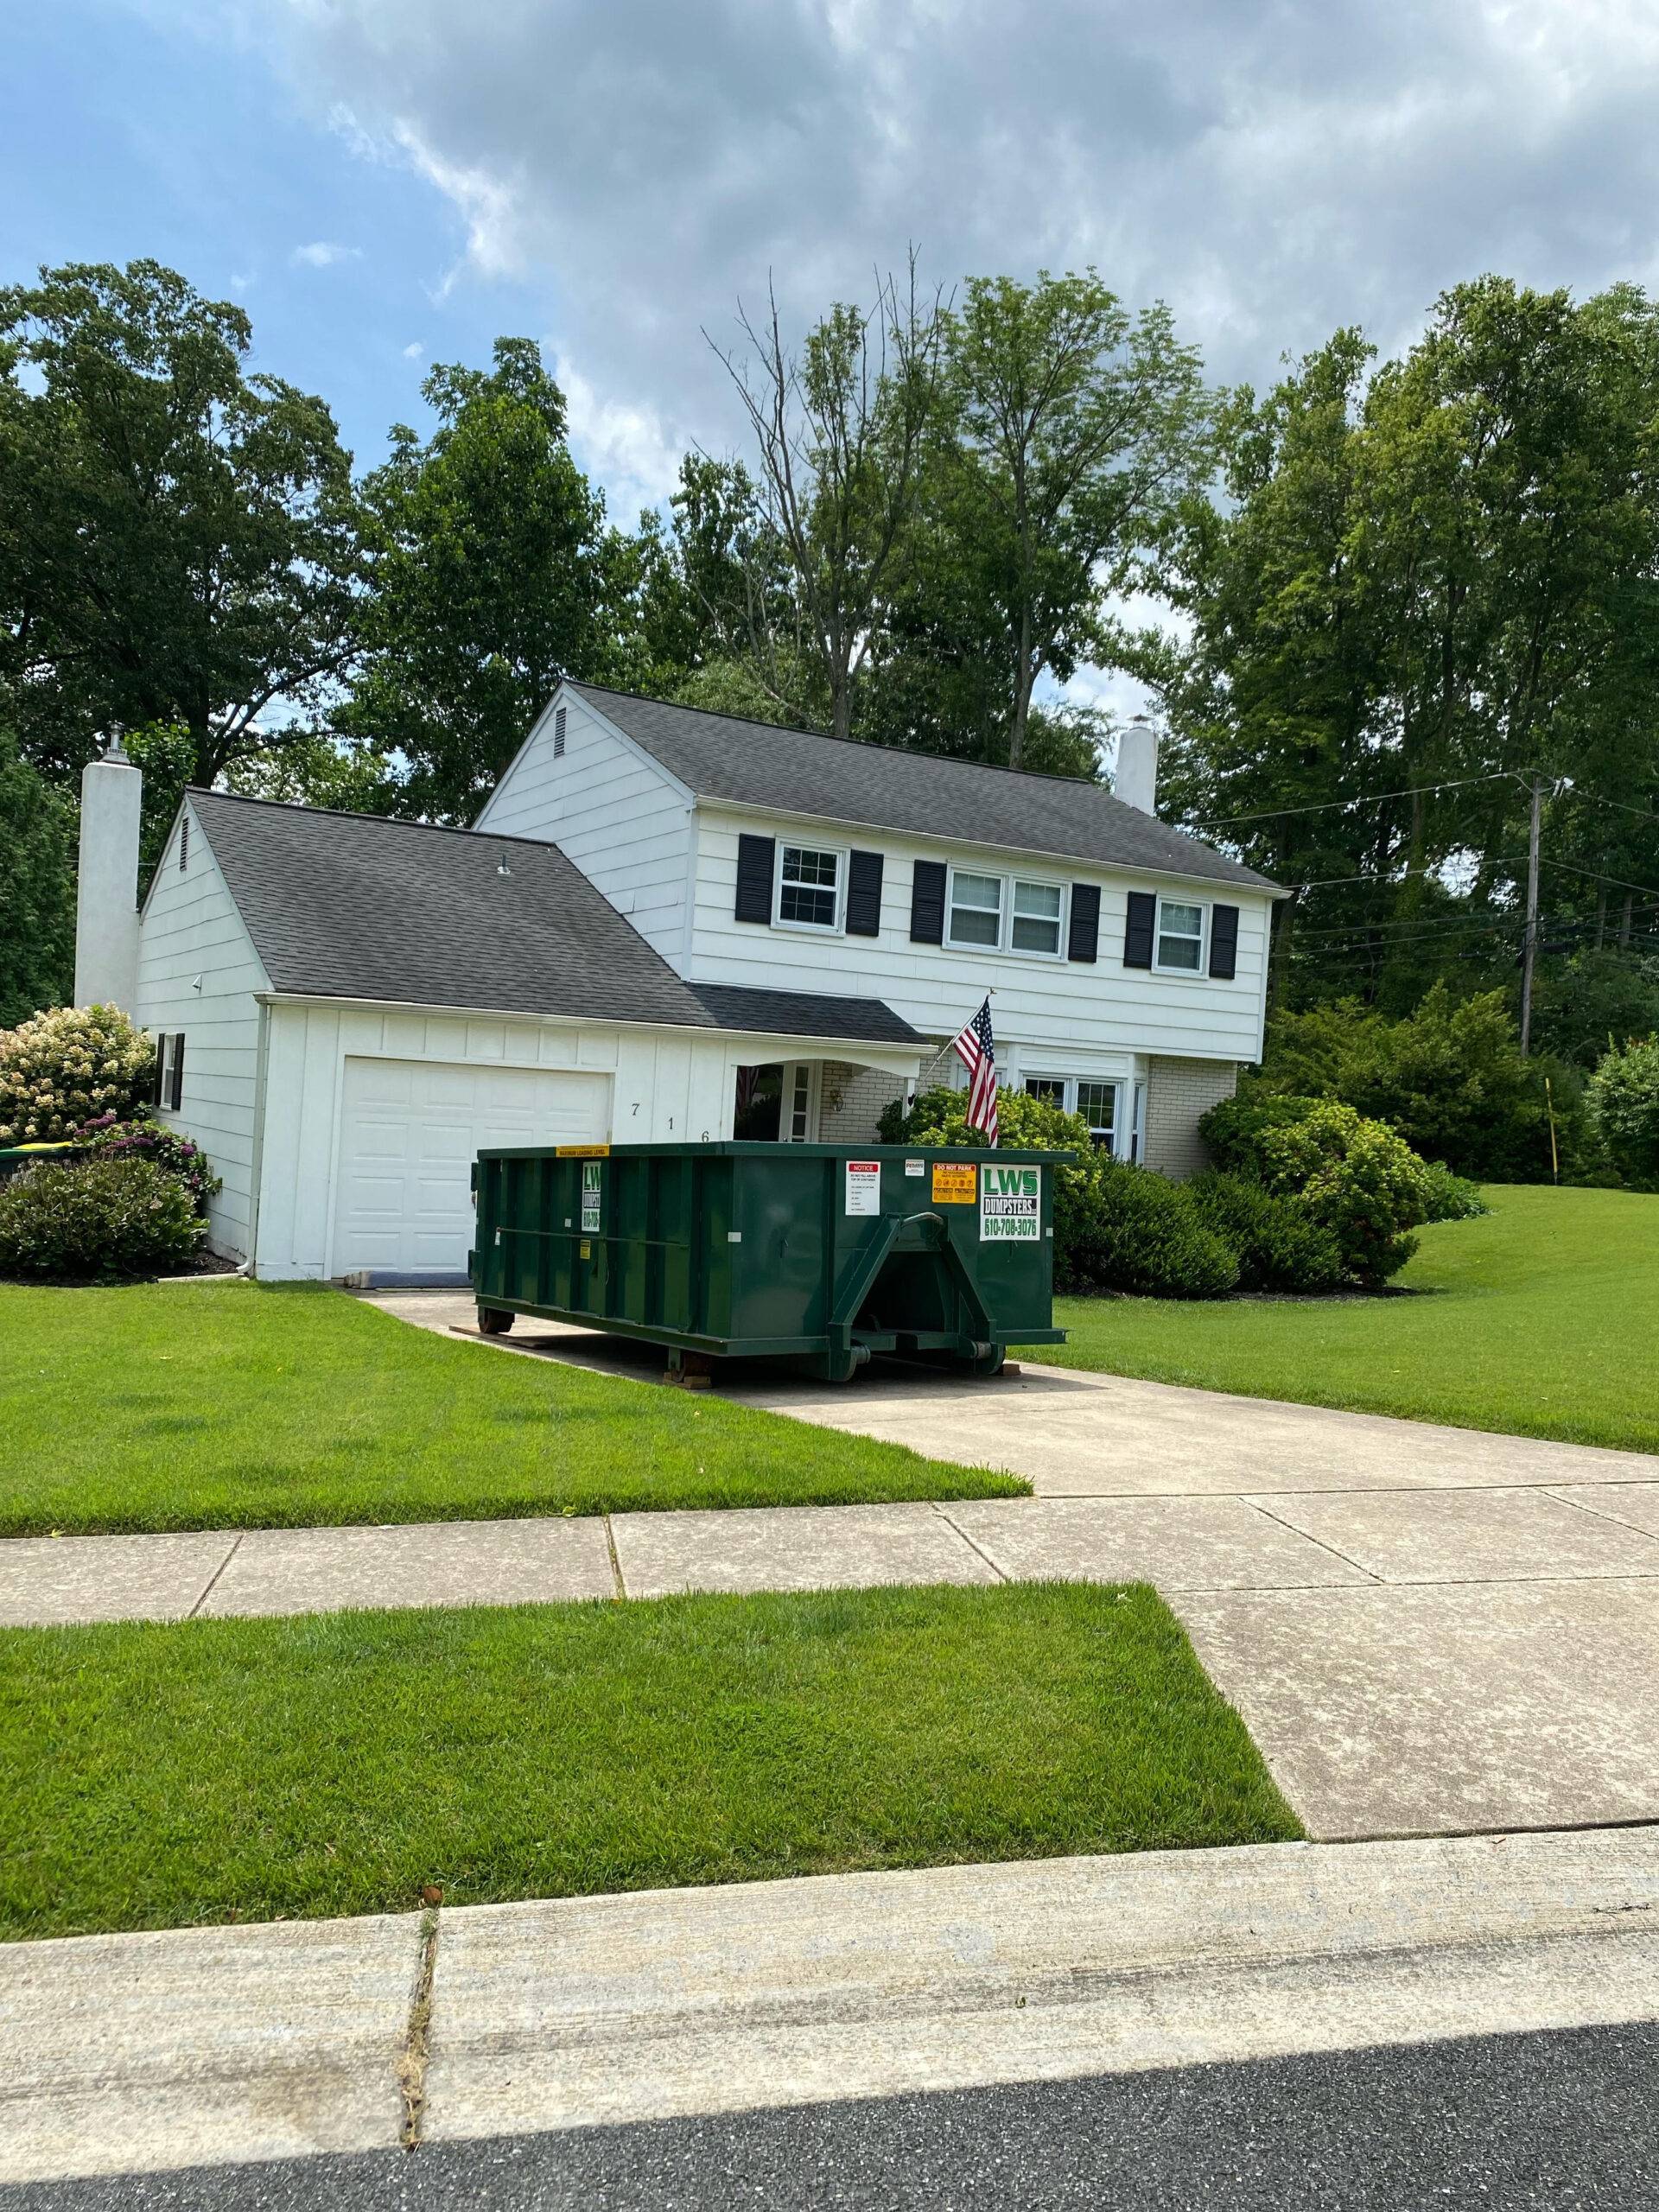 Rent a Dumpster in New London Township, PA